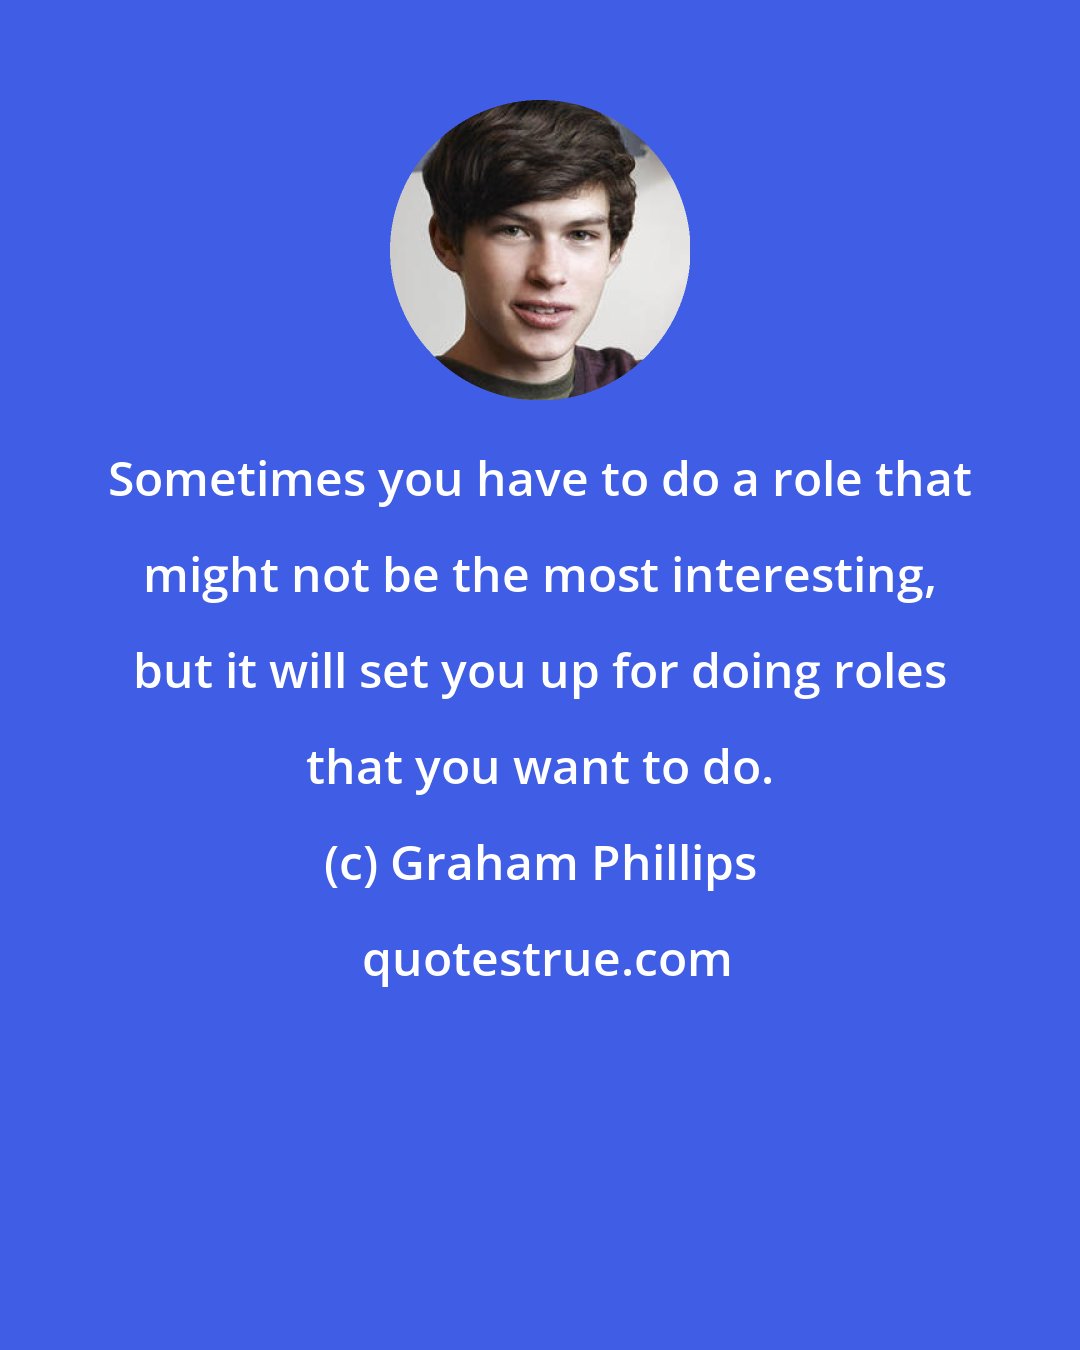 Graham Phillips: Sometimes you have to do a role that might not be the most interesting, but it will set you up for doing roles that you want to do.